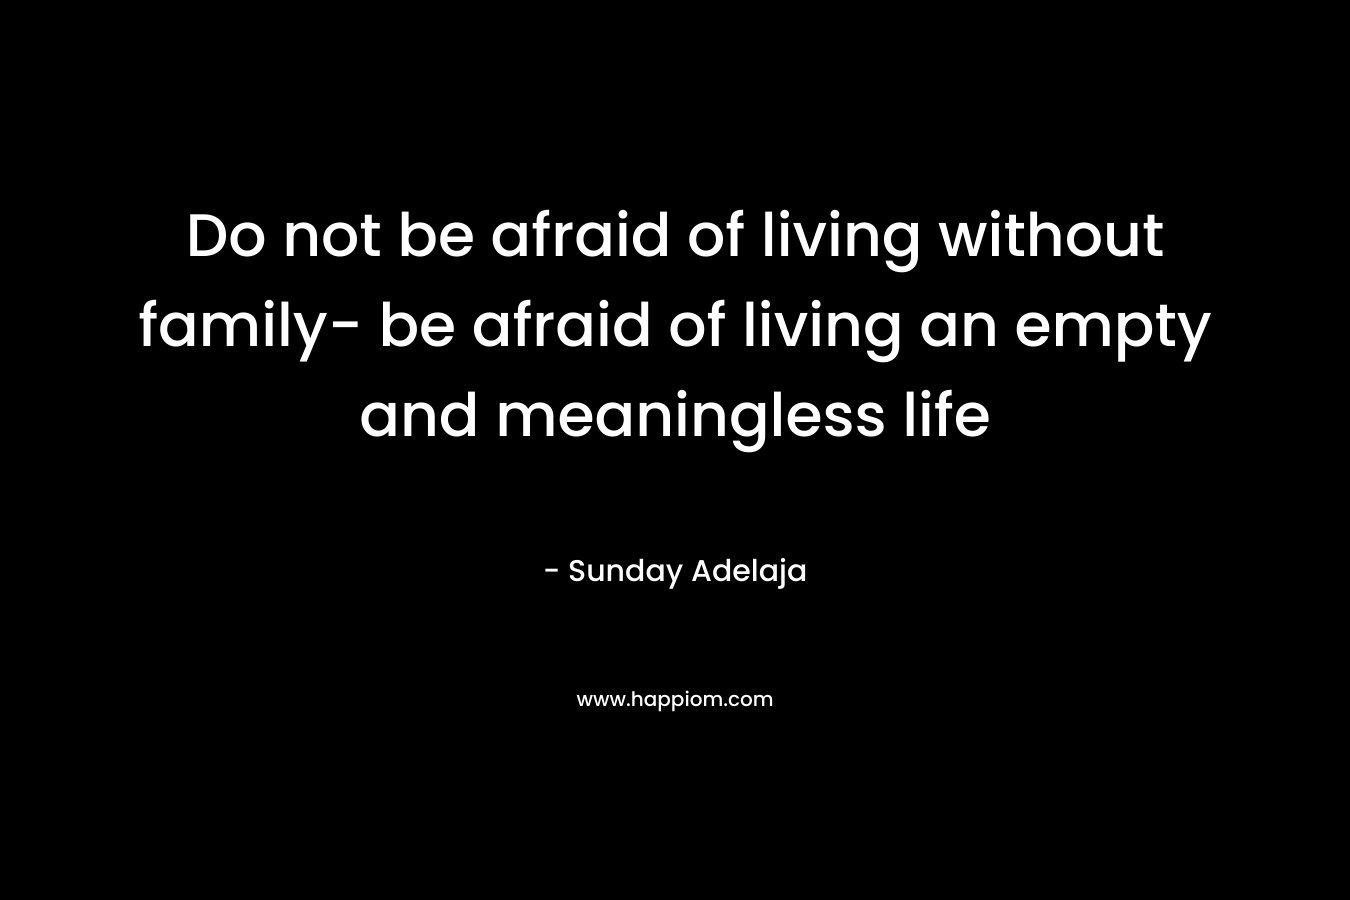 Do not be afraid of living without family- be afraid of living an empty and meaningless life